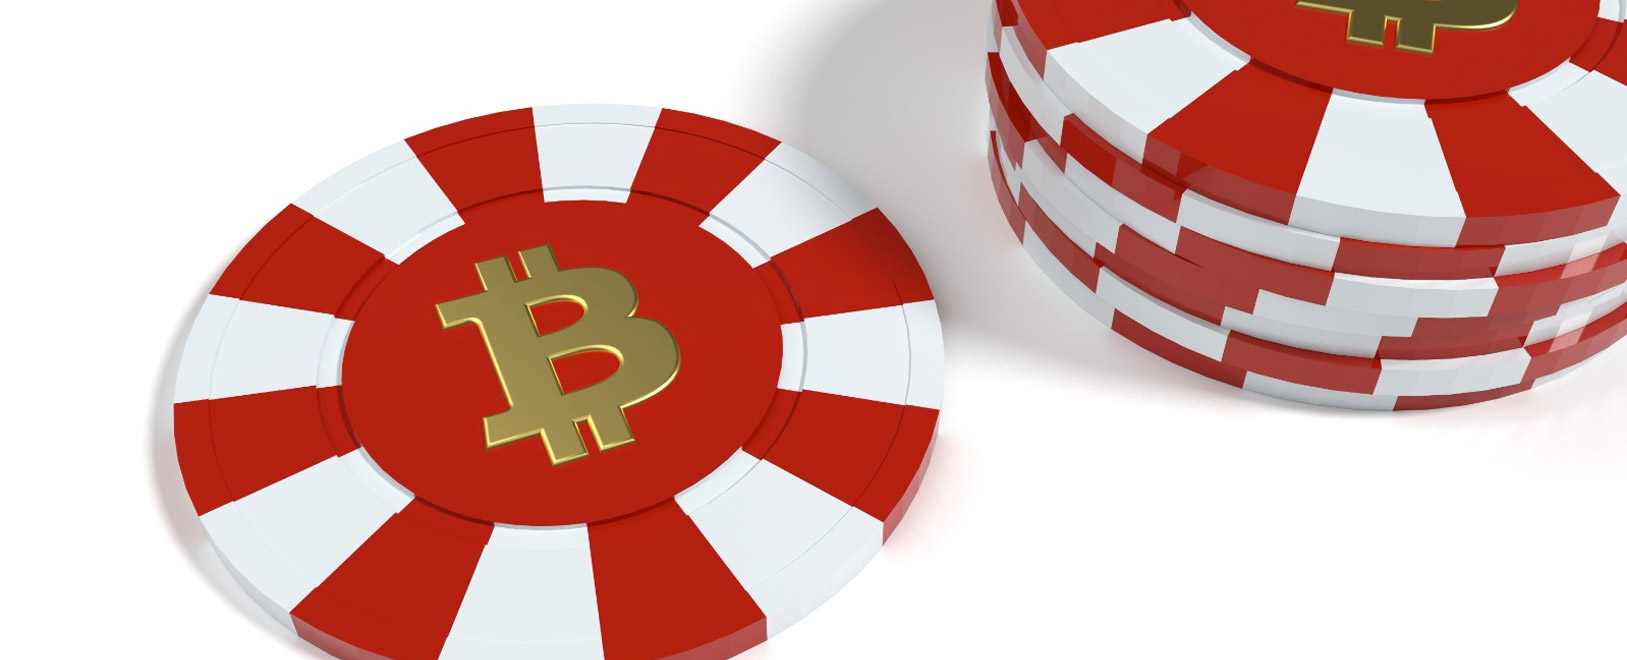 Play poker at Ignition and earn more Bitcoin!